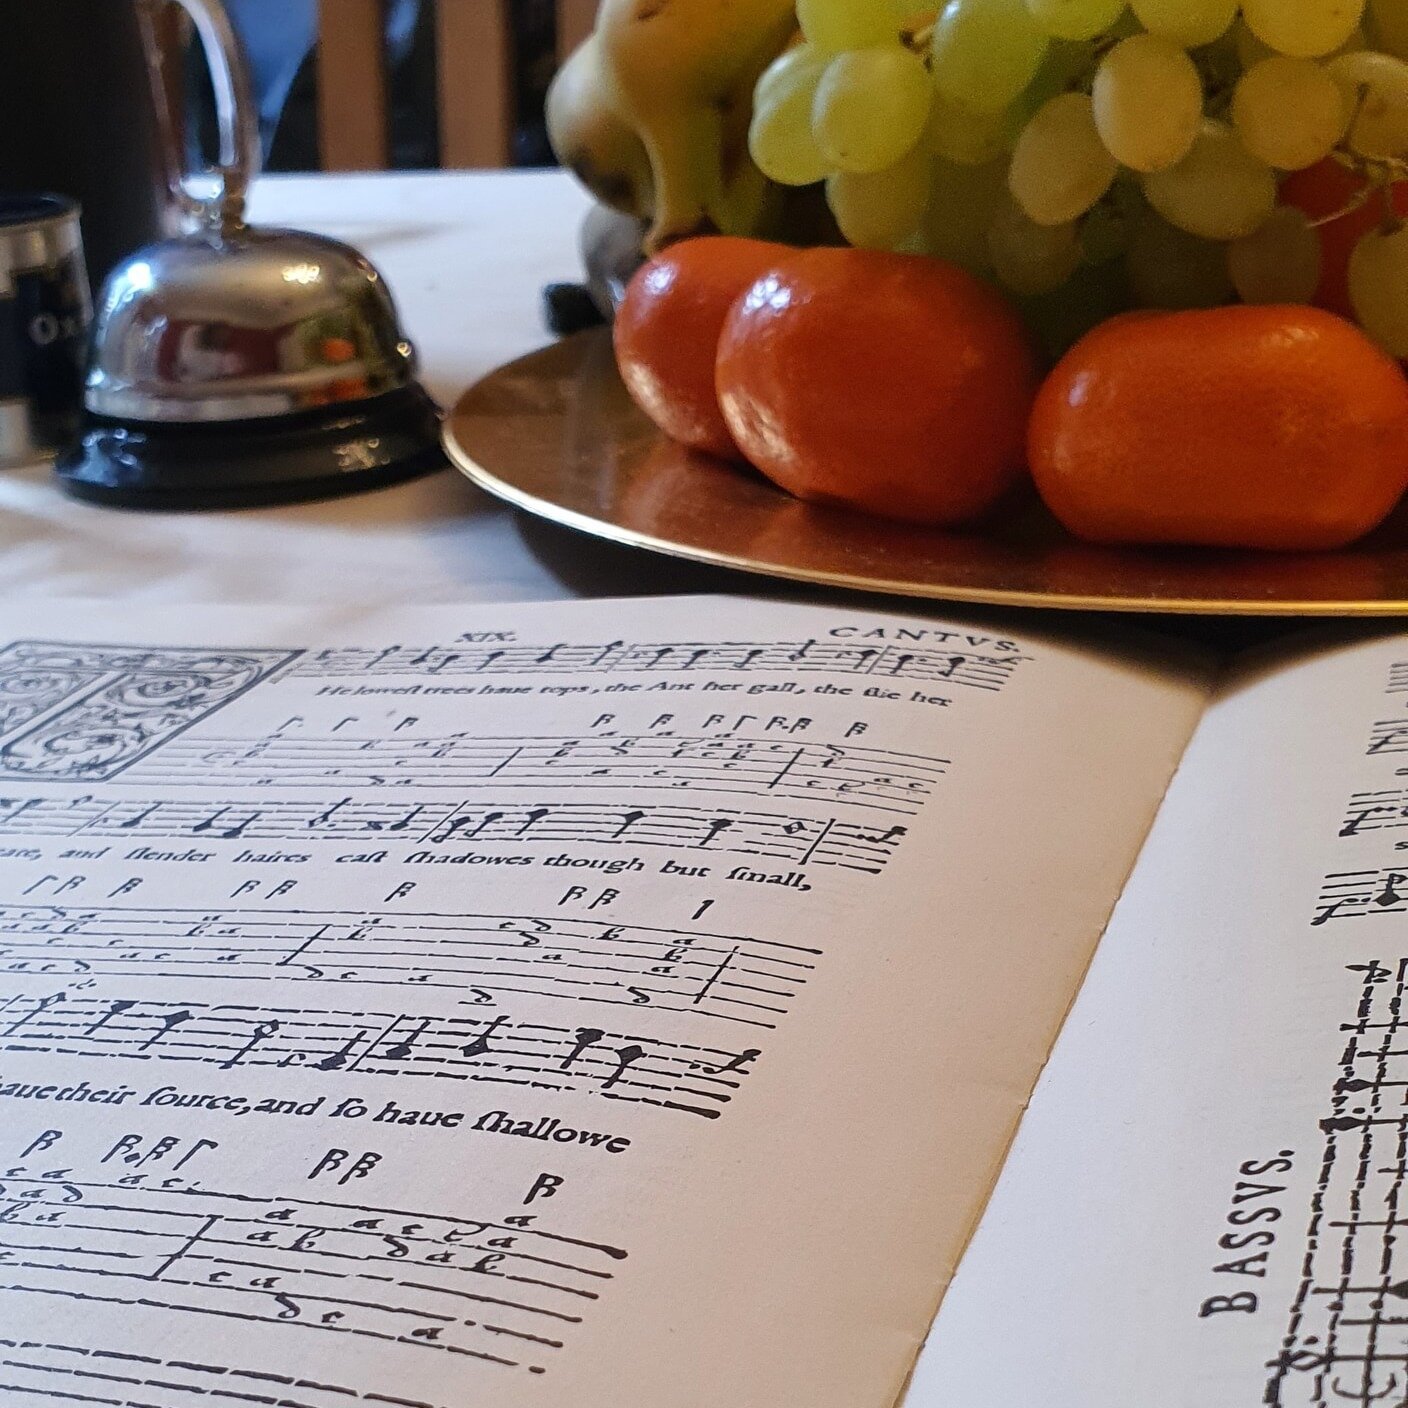 Here at Dowland Youth Works we explore all there is to know about reading facsimile. If you're fascinated by this amazing style of music writing then the Dowland Youth Works course is for you. Find out more and apply at www.dowlandyouthworks.com 
#ea